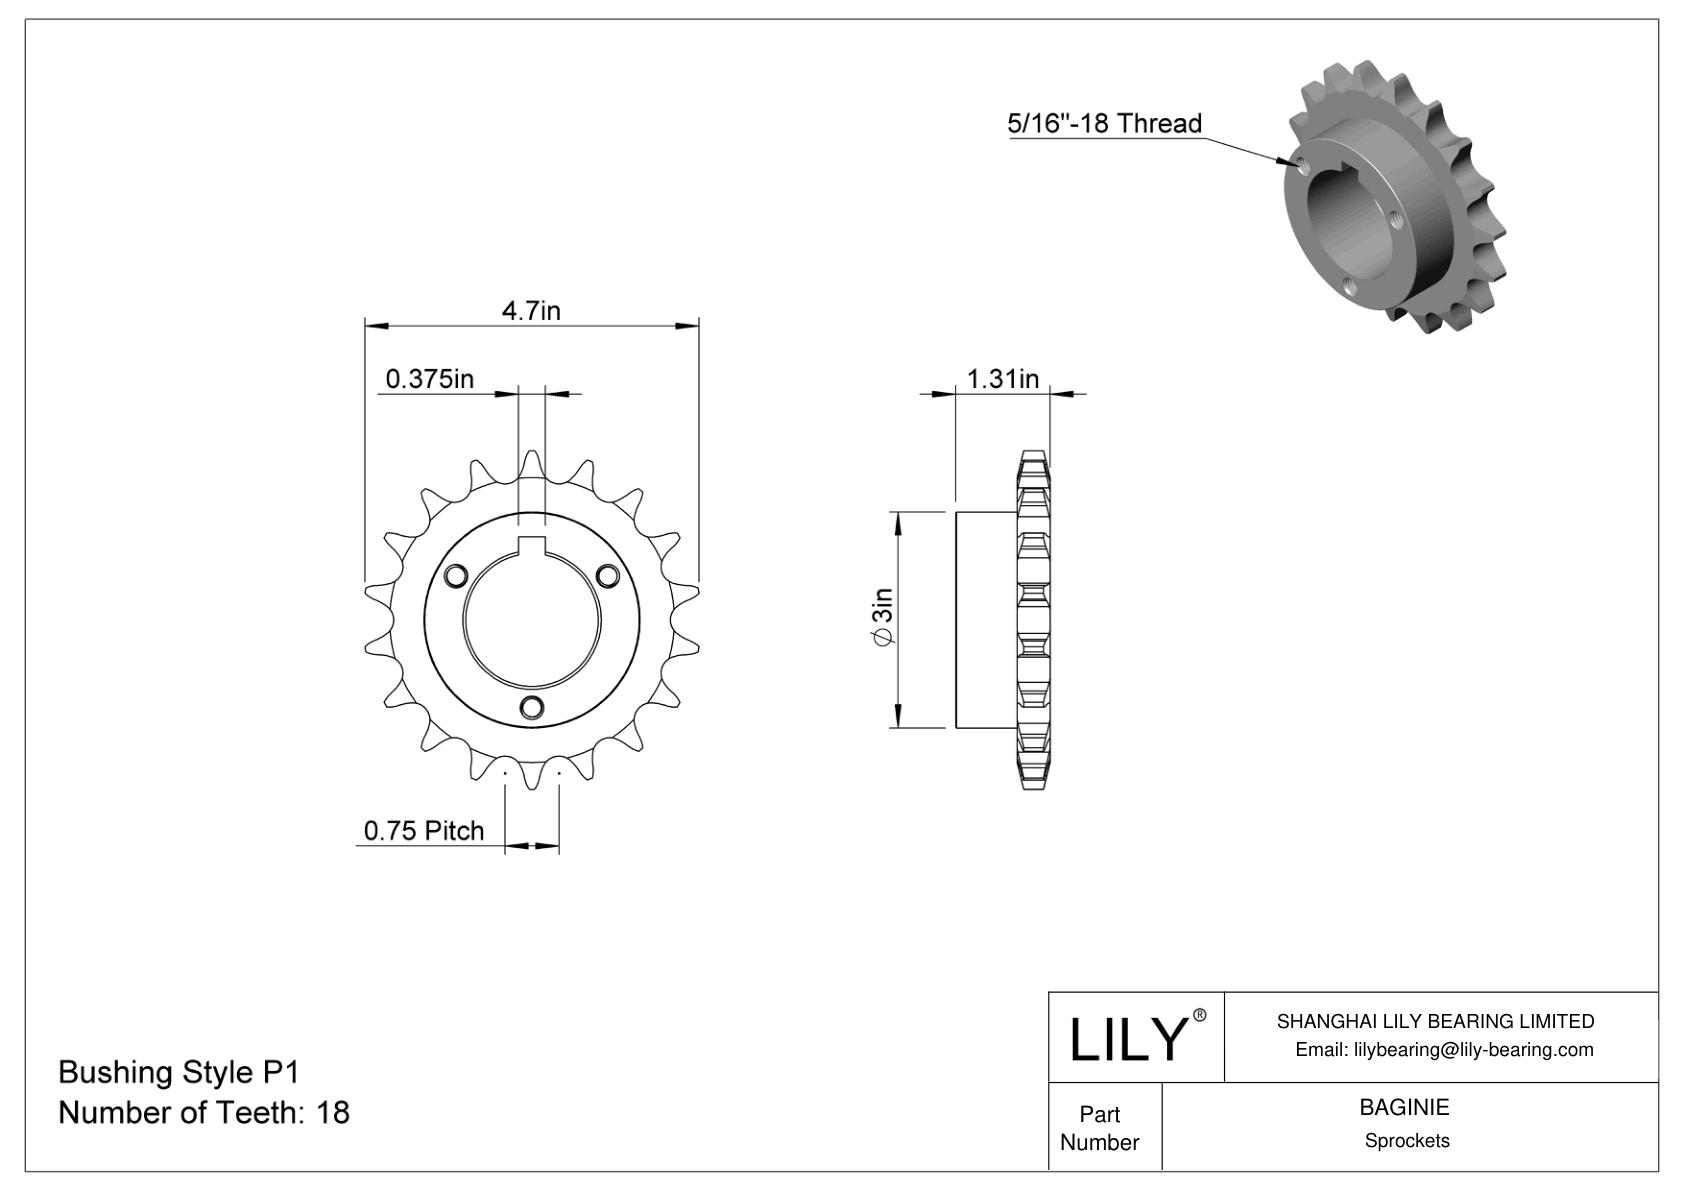 BAGINIE Split-Tapered Bushing-Bore Sprockets for ANSI Roller Chain cad drawing